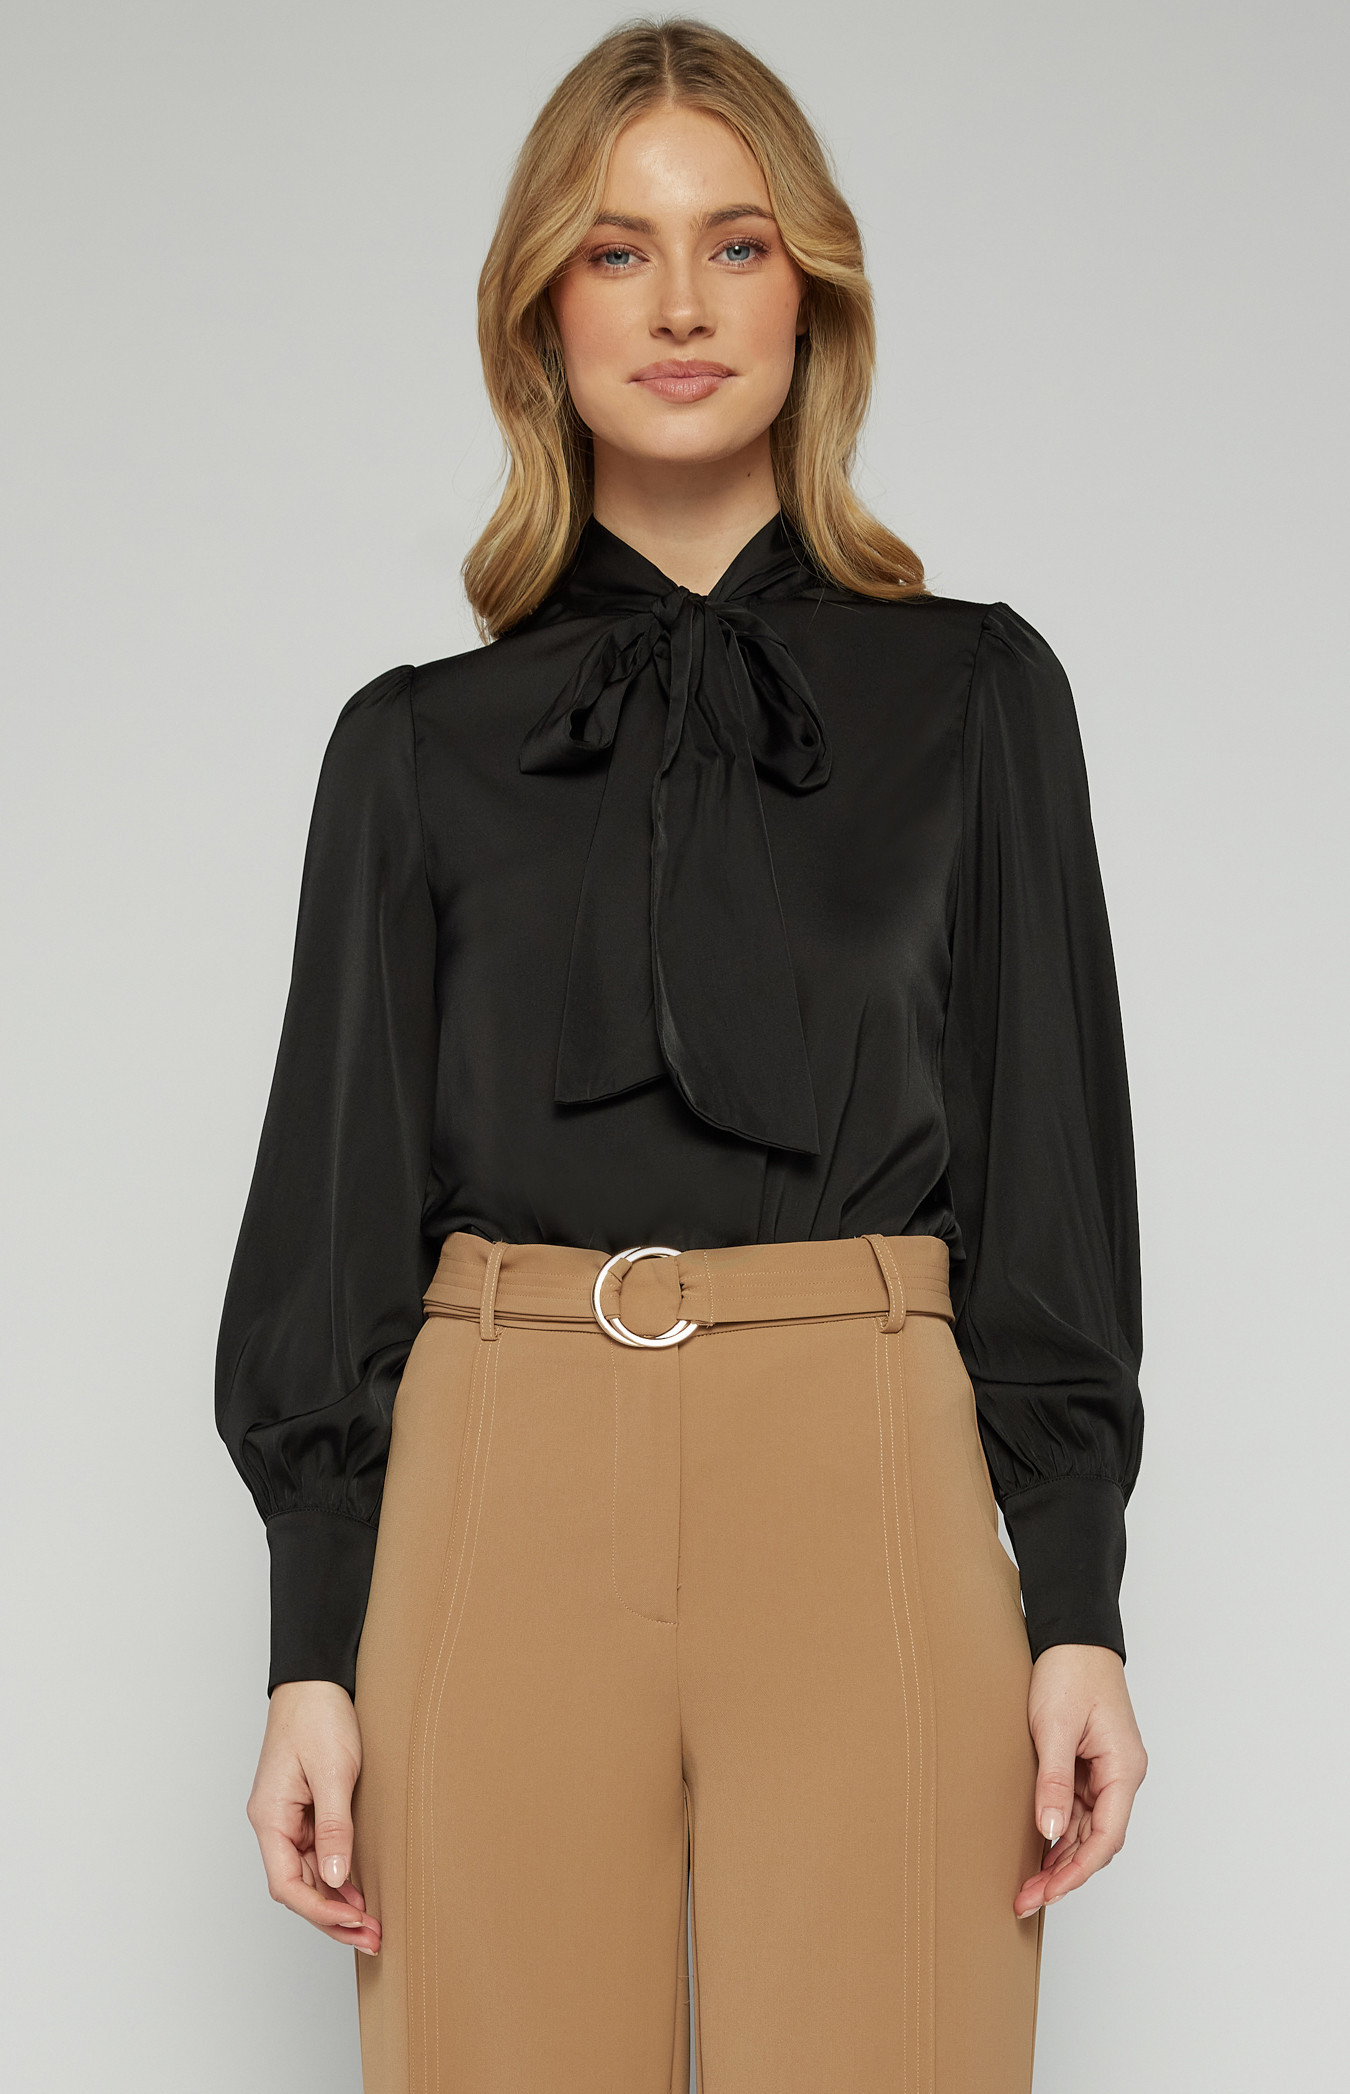 Neck Tie Satin Top with Pleated Shoulder Detail (STO730B)